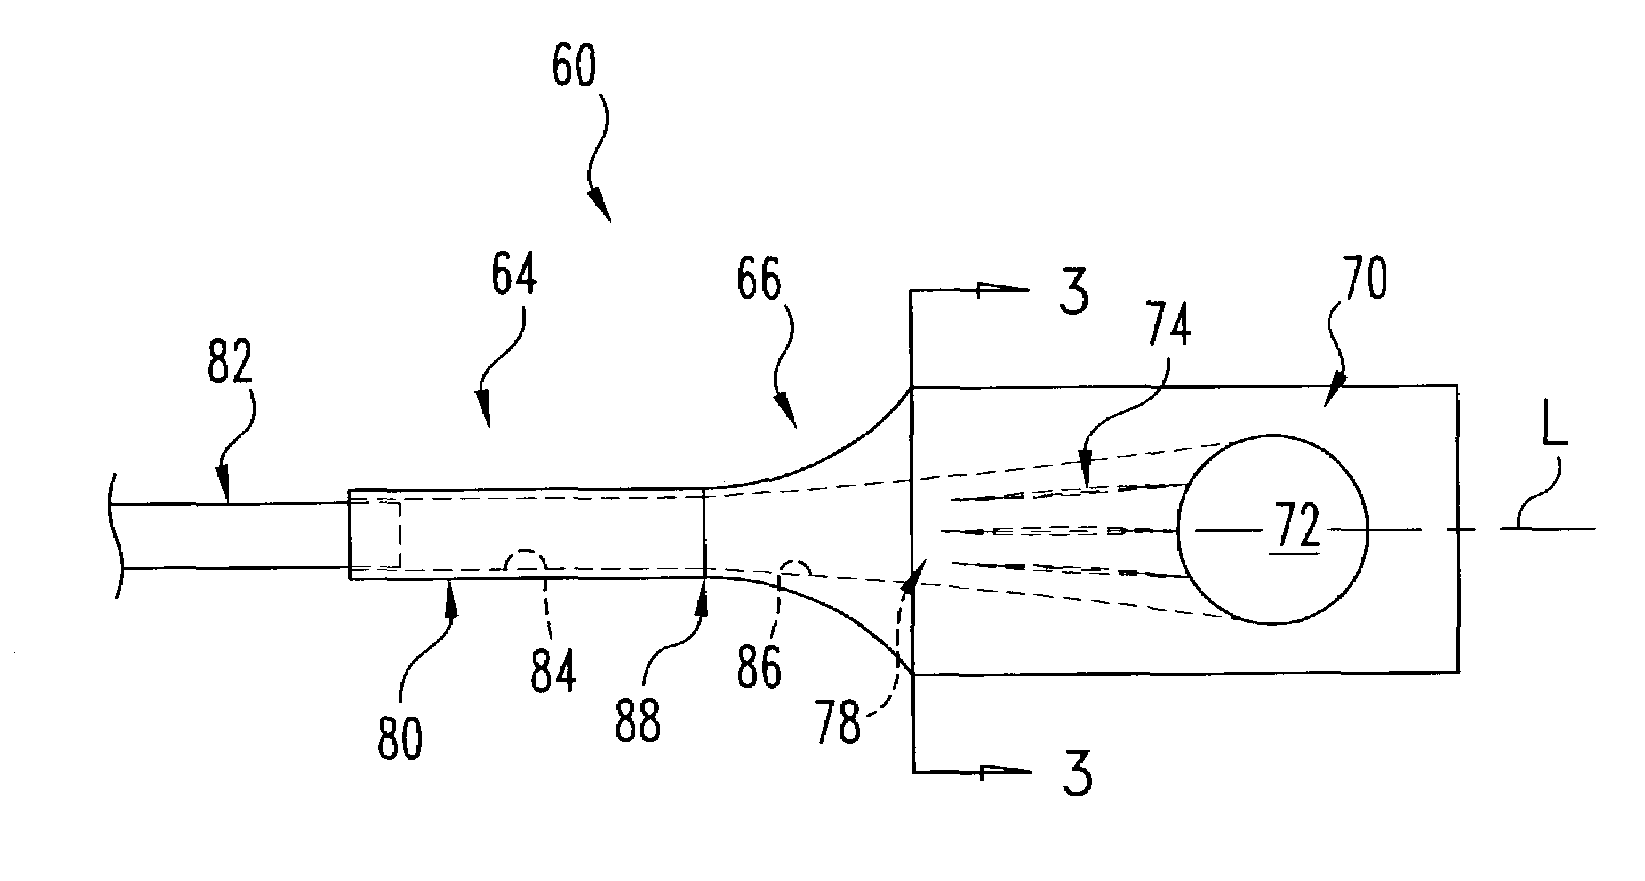 Instrumentation and method for delivering an implant into a vertebral space